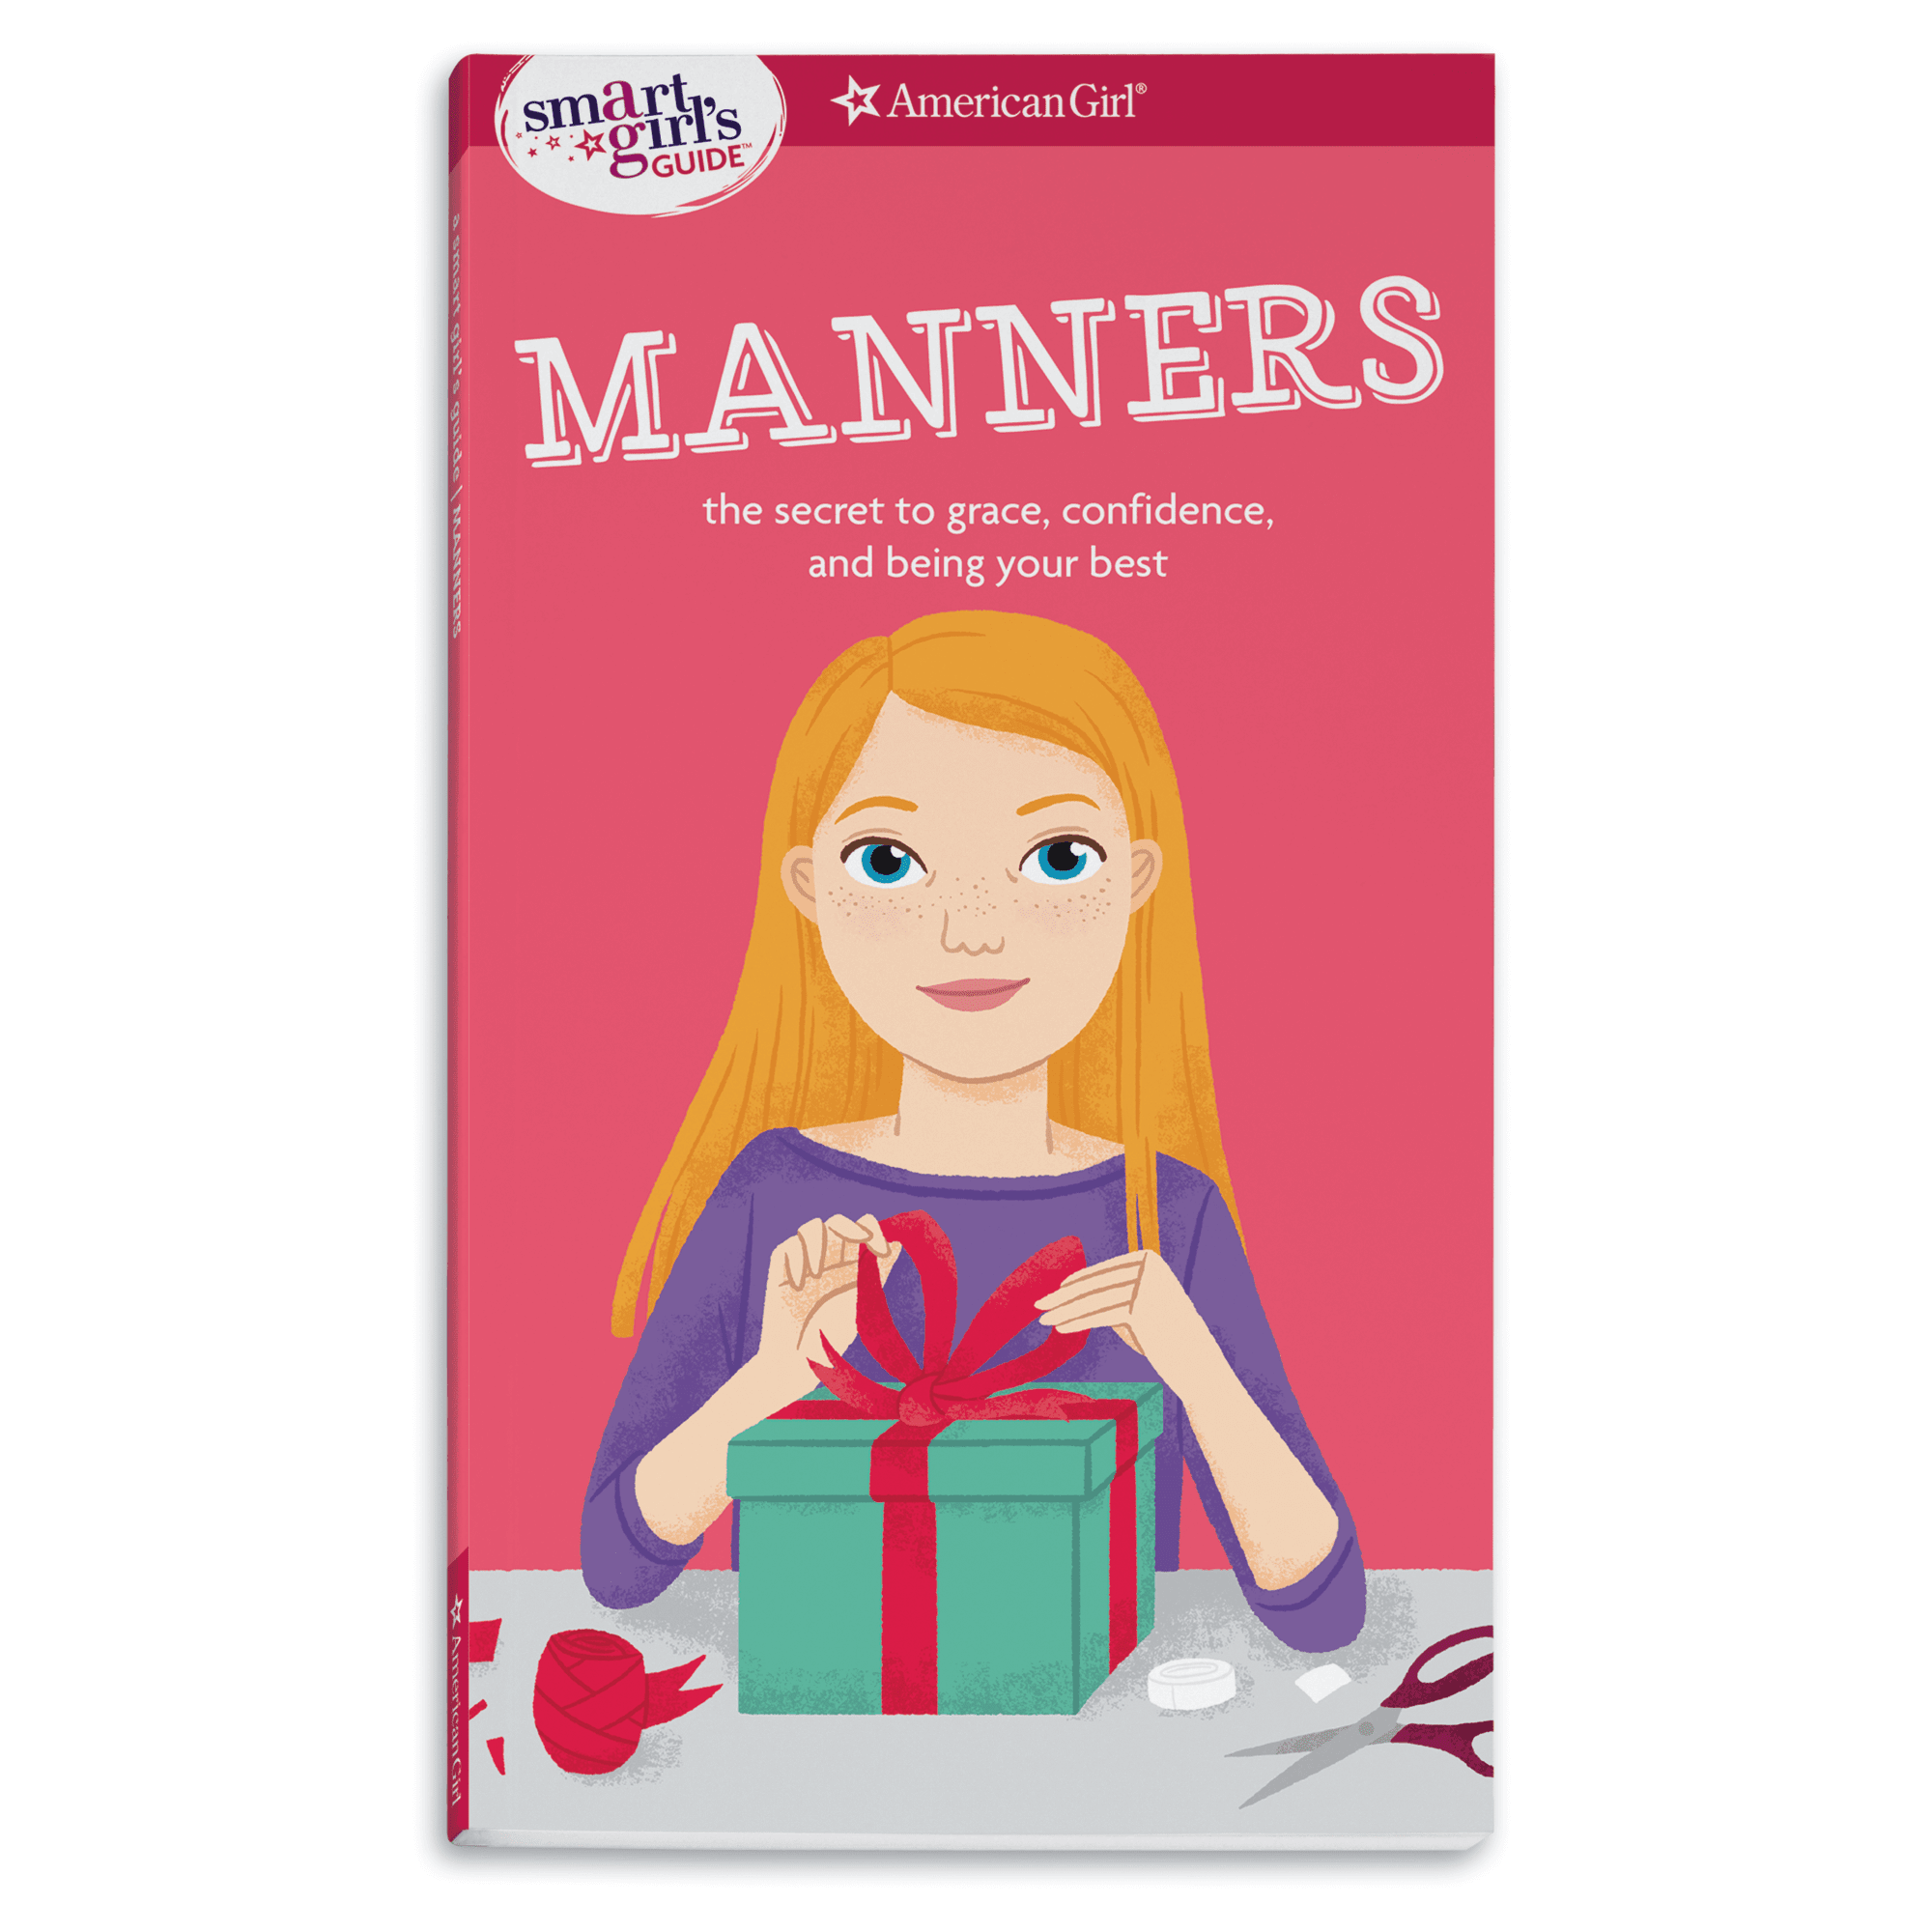 A Smart Girl's Guide: Manners